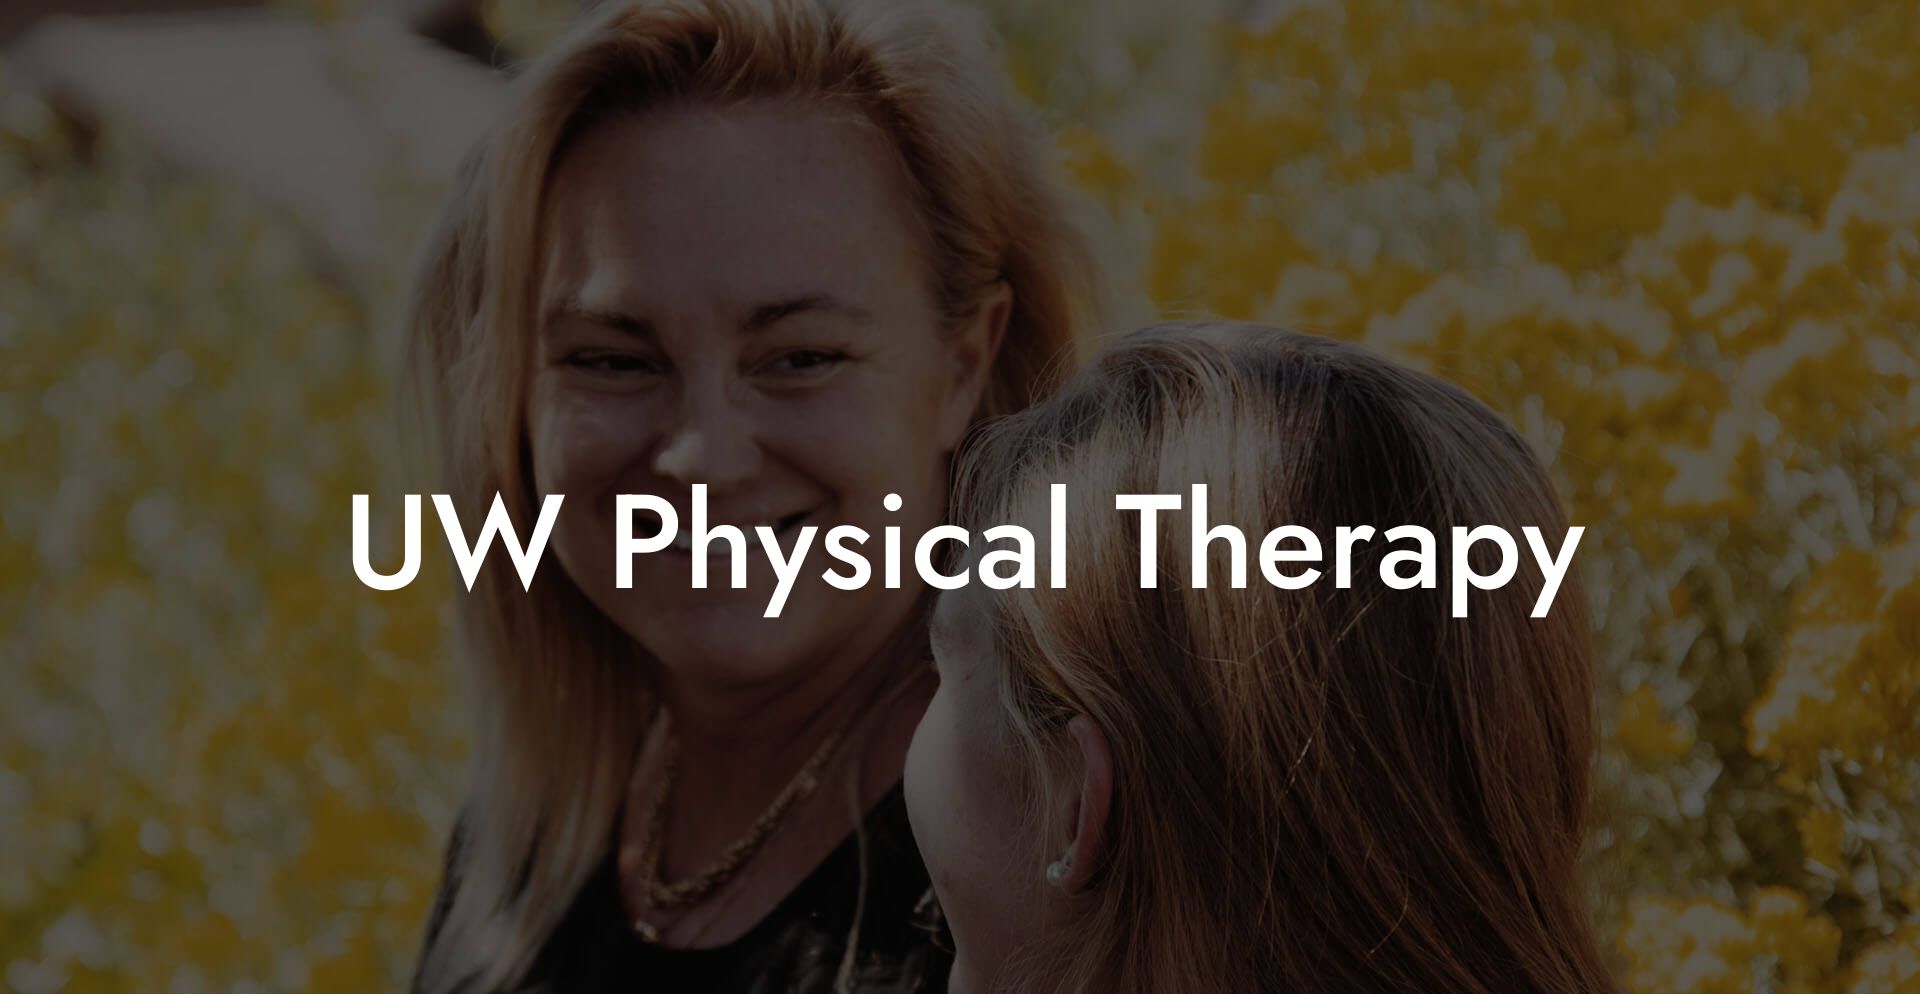 UW Physical Therapy